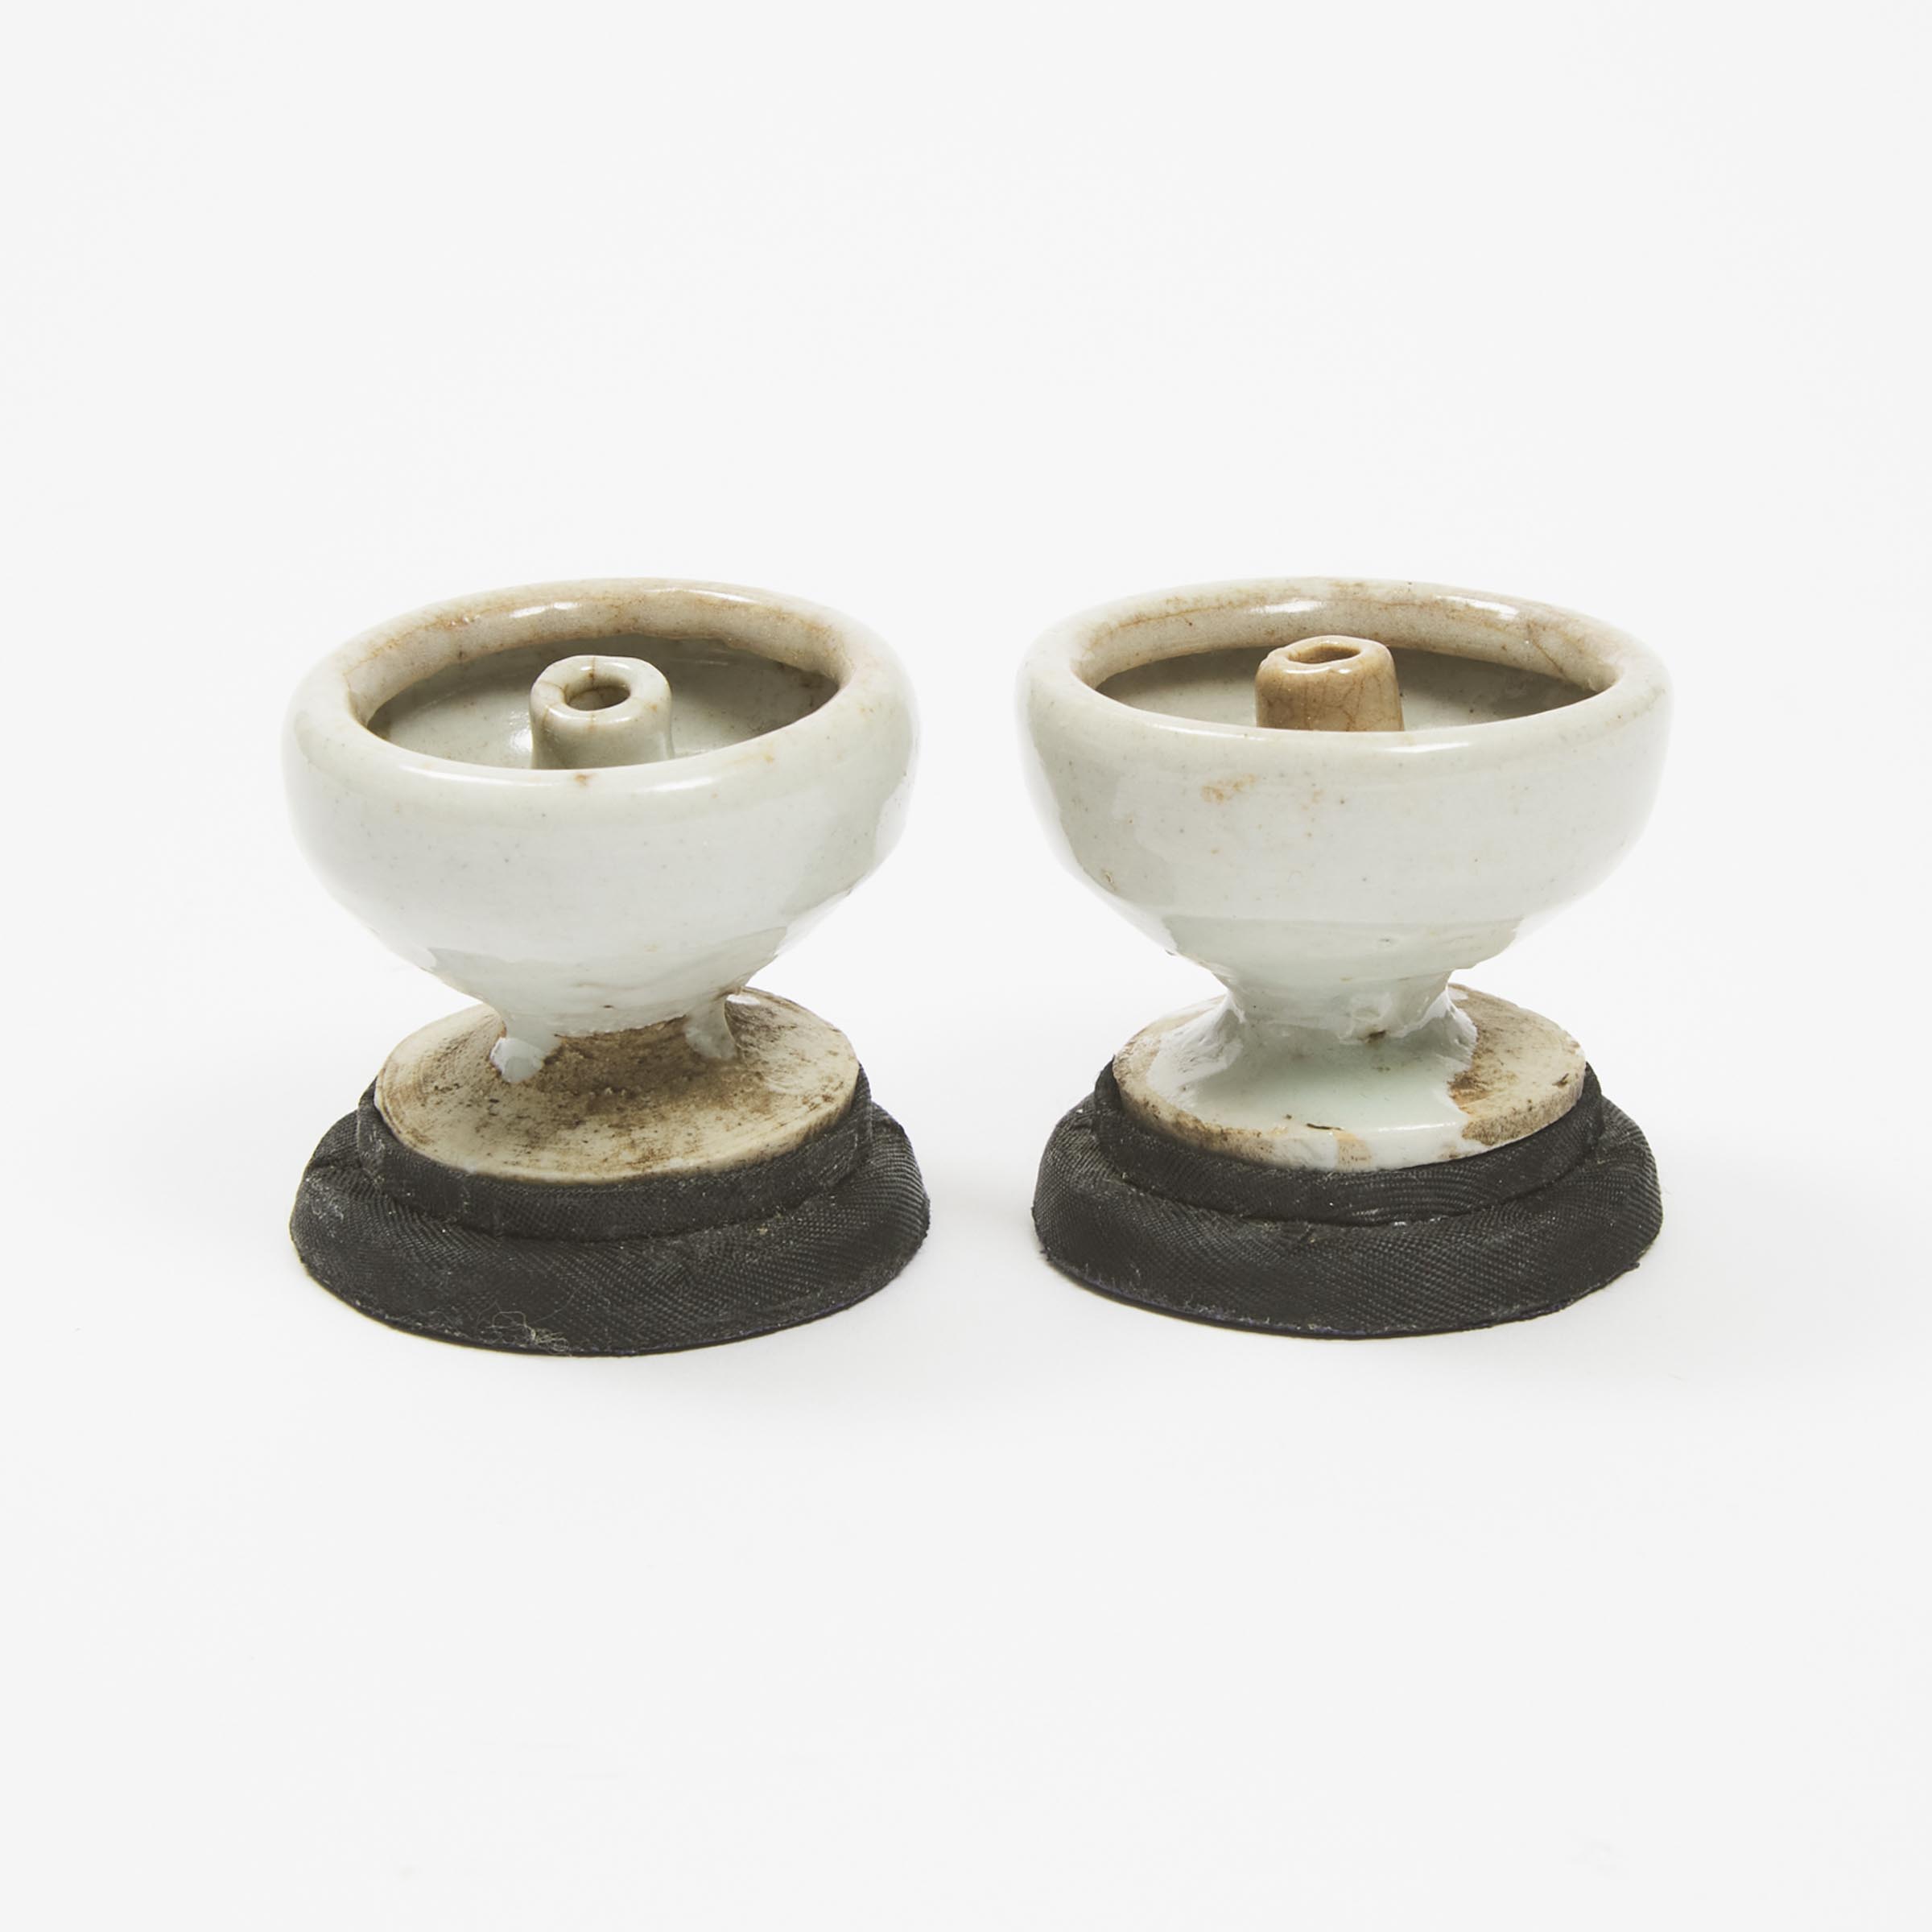 A Pair of Small White-Glazed Oil Lamp Stands, Song Dynasty (960-1279)